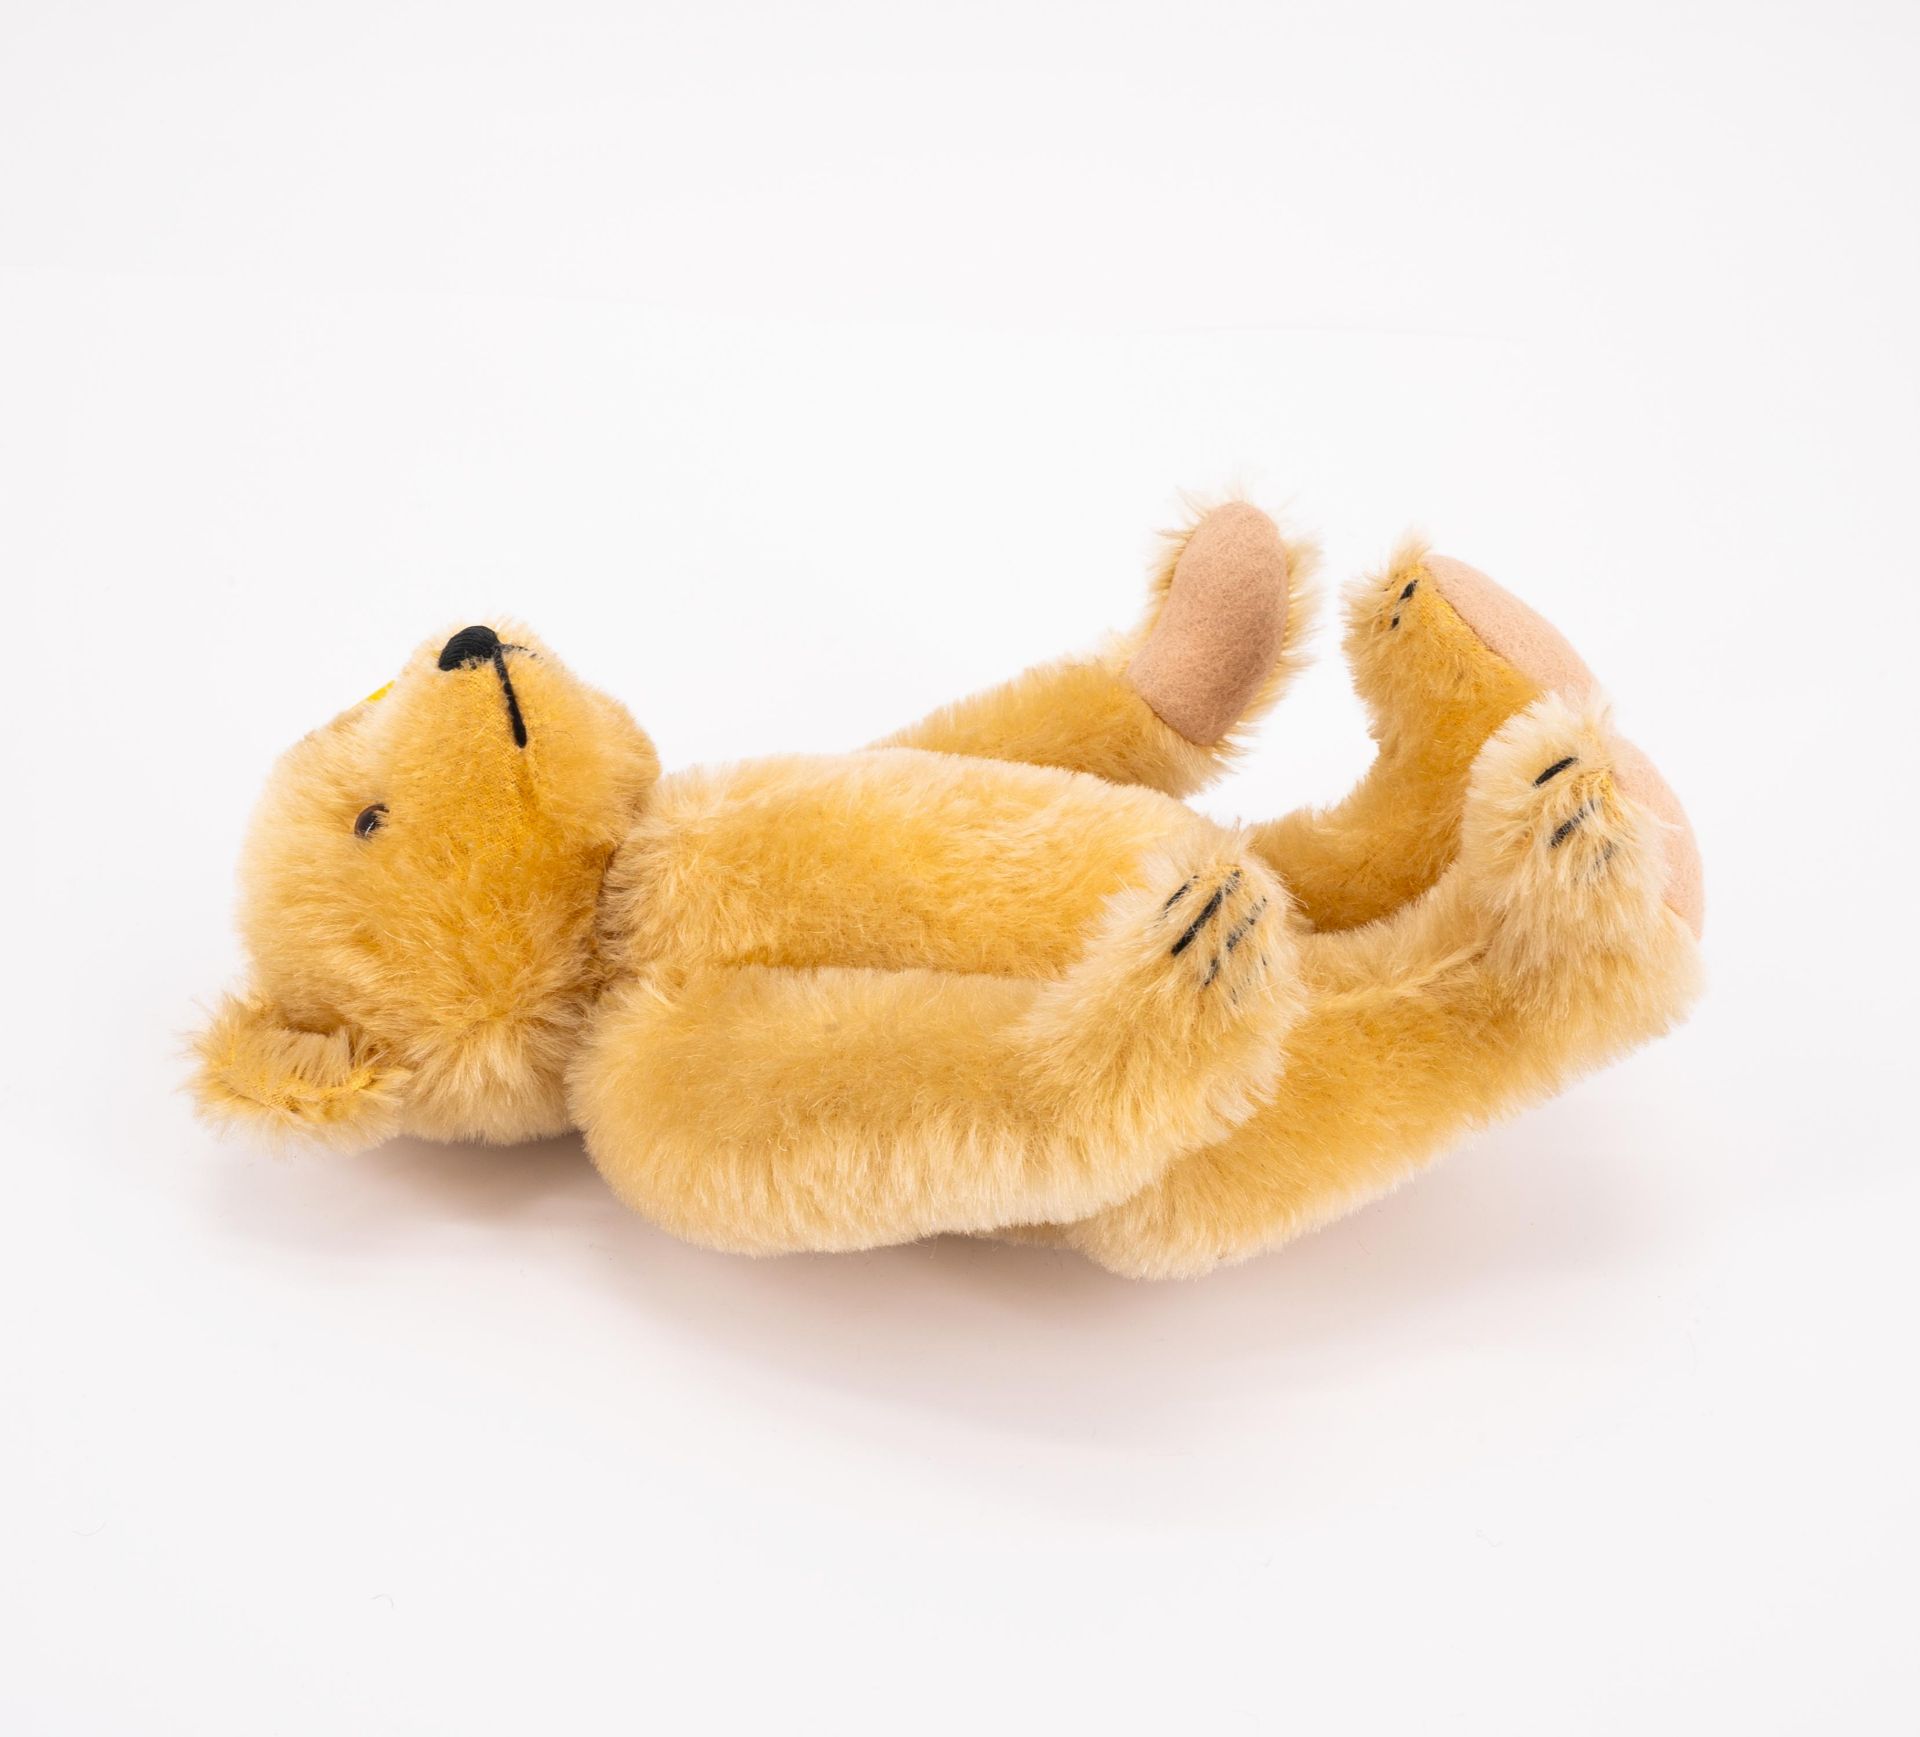 Steiff: TWO STEIFF BEARS FROM COLLECTORS EDITIONS MADE OF MOHAIR PLUSH, WOOL AND GLASS - Image 7 of 8